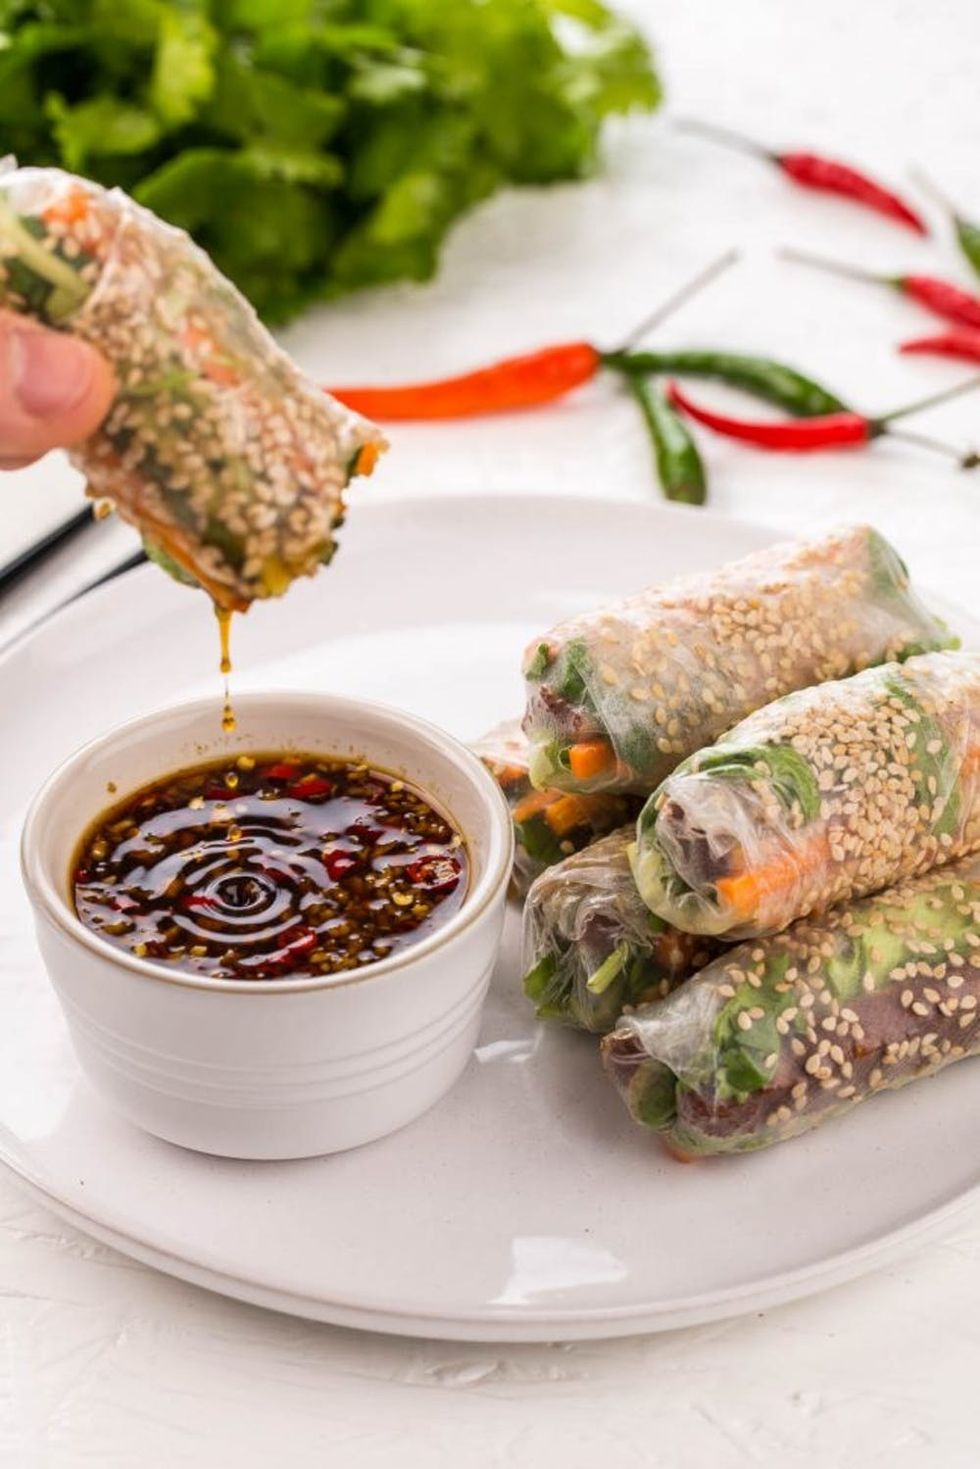 13 Colorful Spring Roll Recipes to Lighten and Brighten Meatless Monday